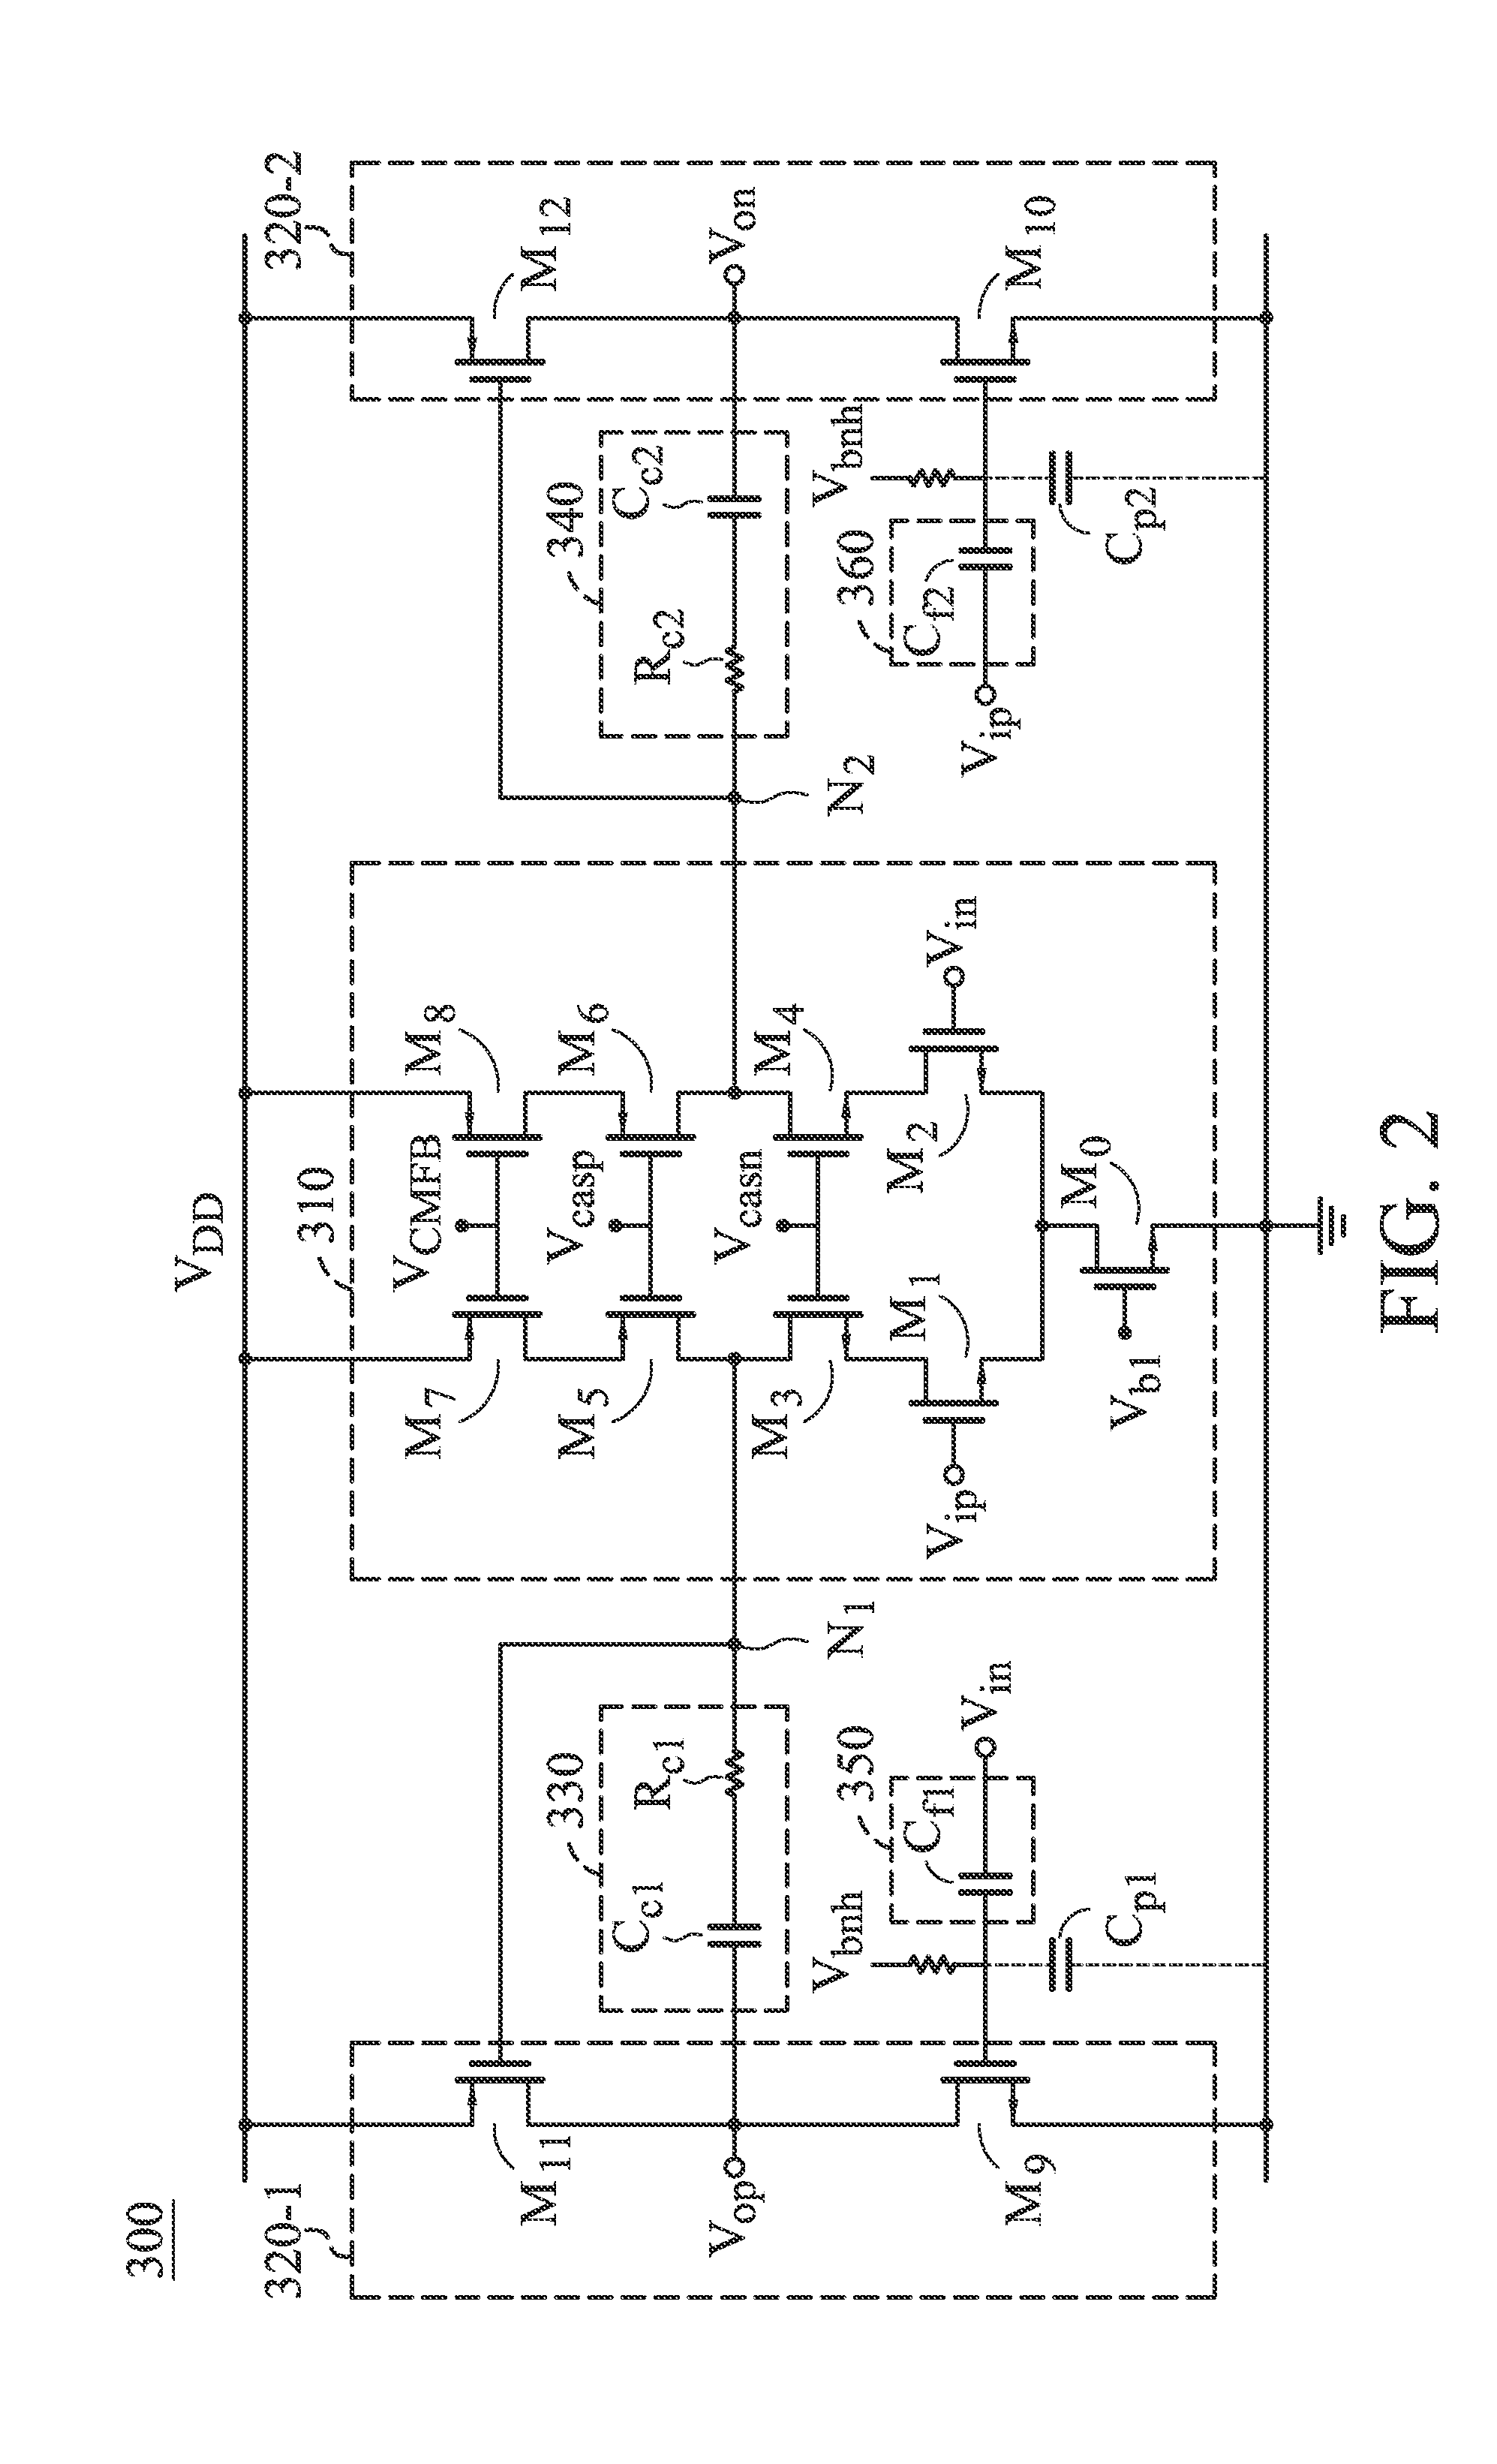 Operational amplifier circuits